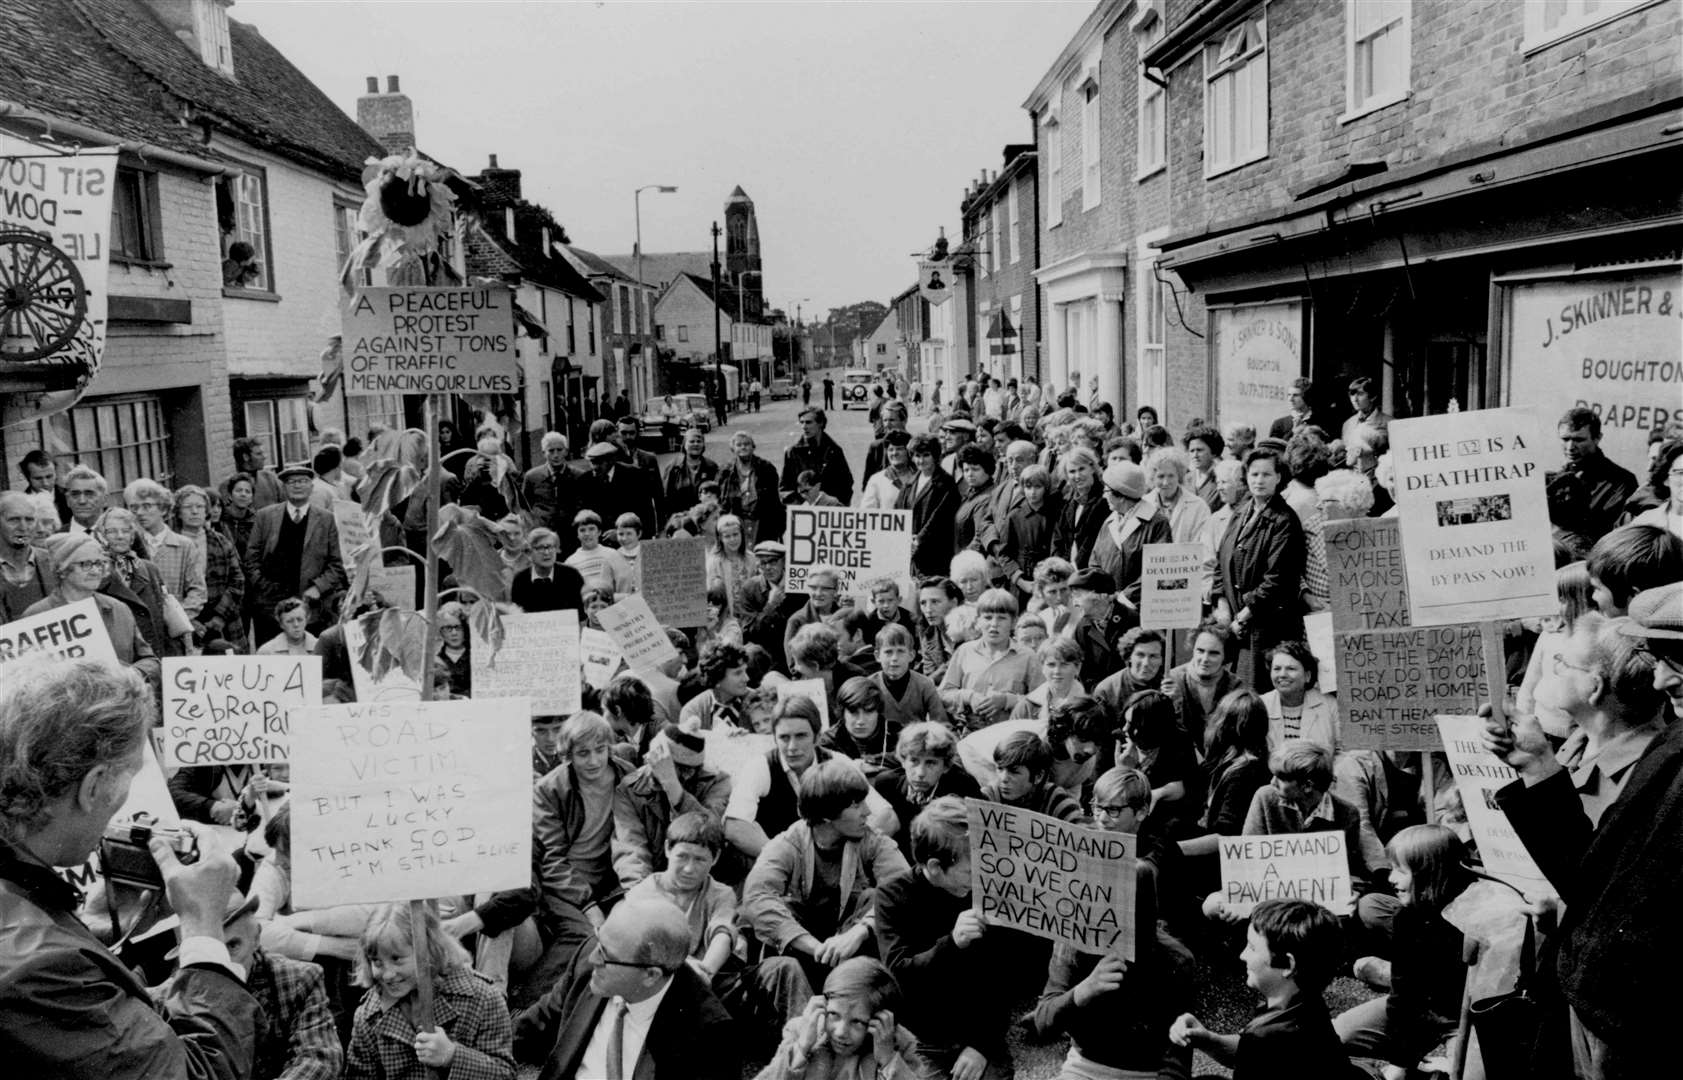 Boughton villagers forced A2 traffic to make a 12-mile detour via the Thanet Way in August 1969 when they had a sit-down protest in the main street over road safety fears and a call for a bypass. Boughton Bypass opened in March 1976